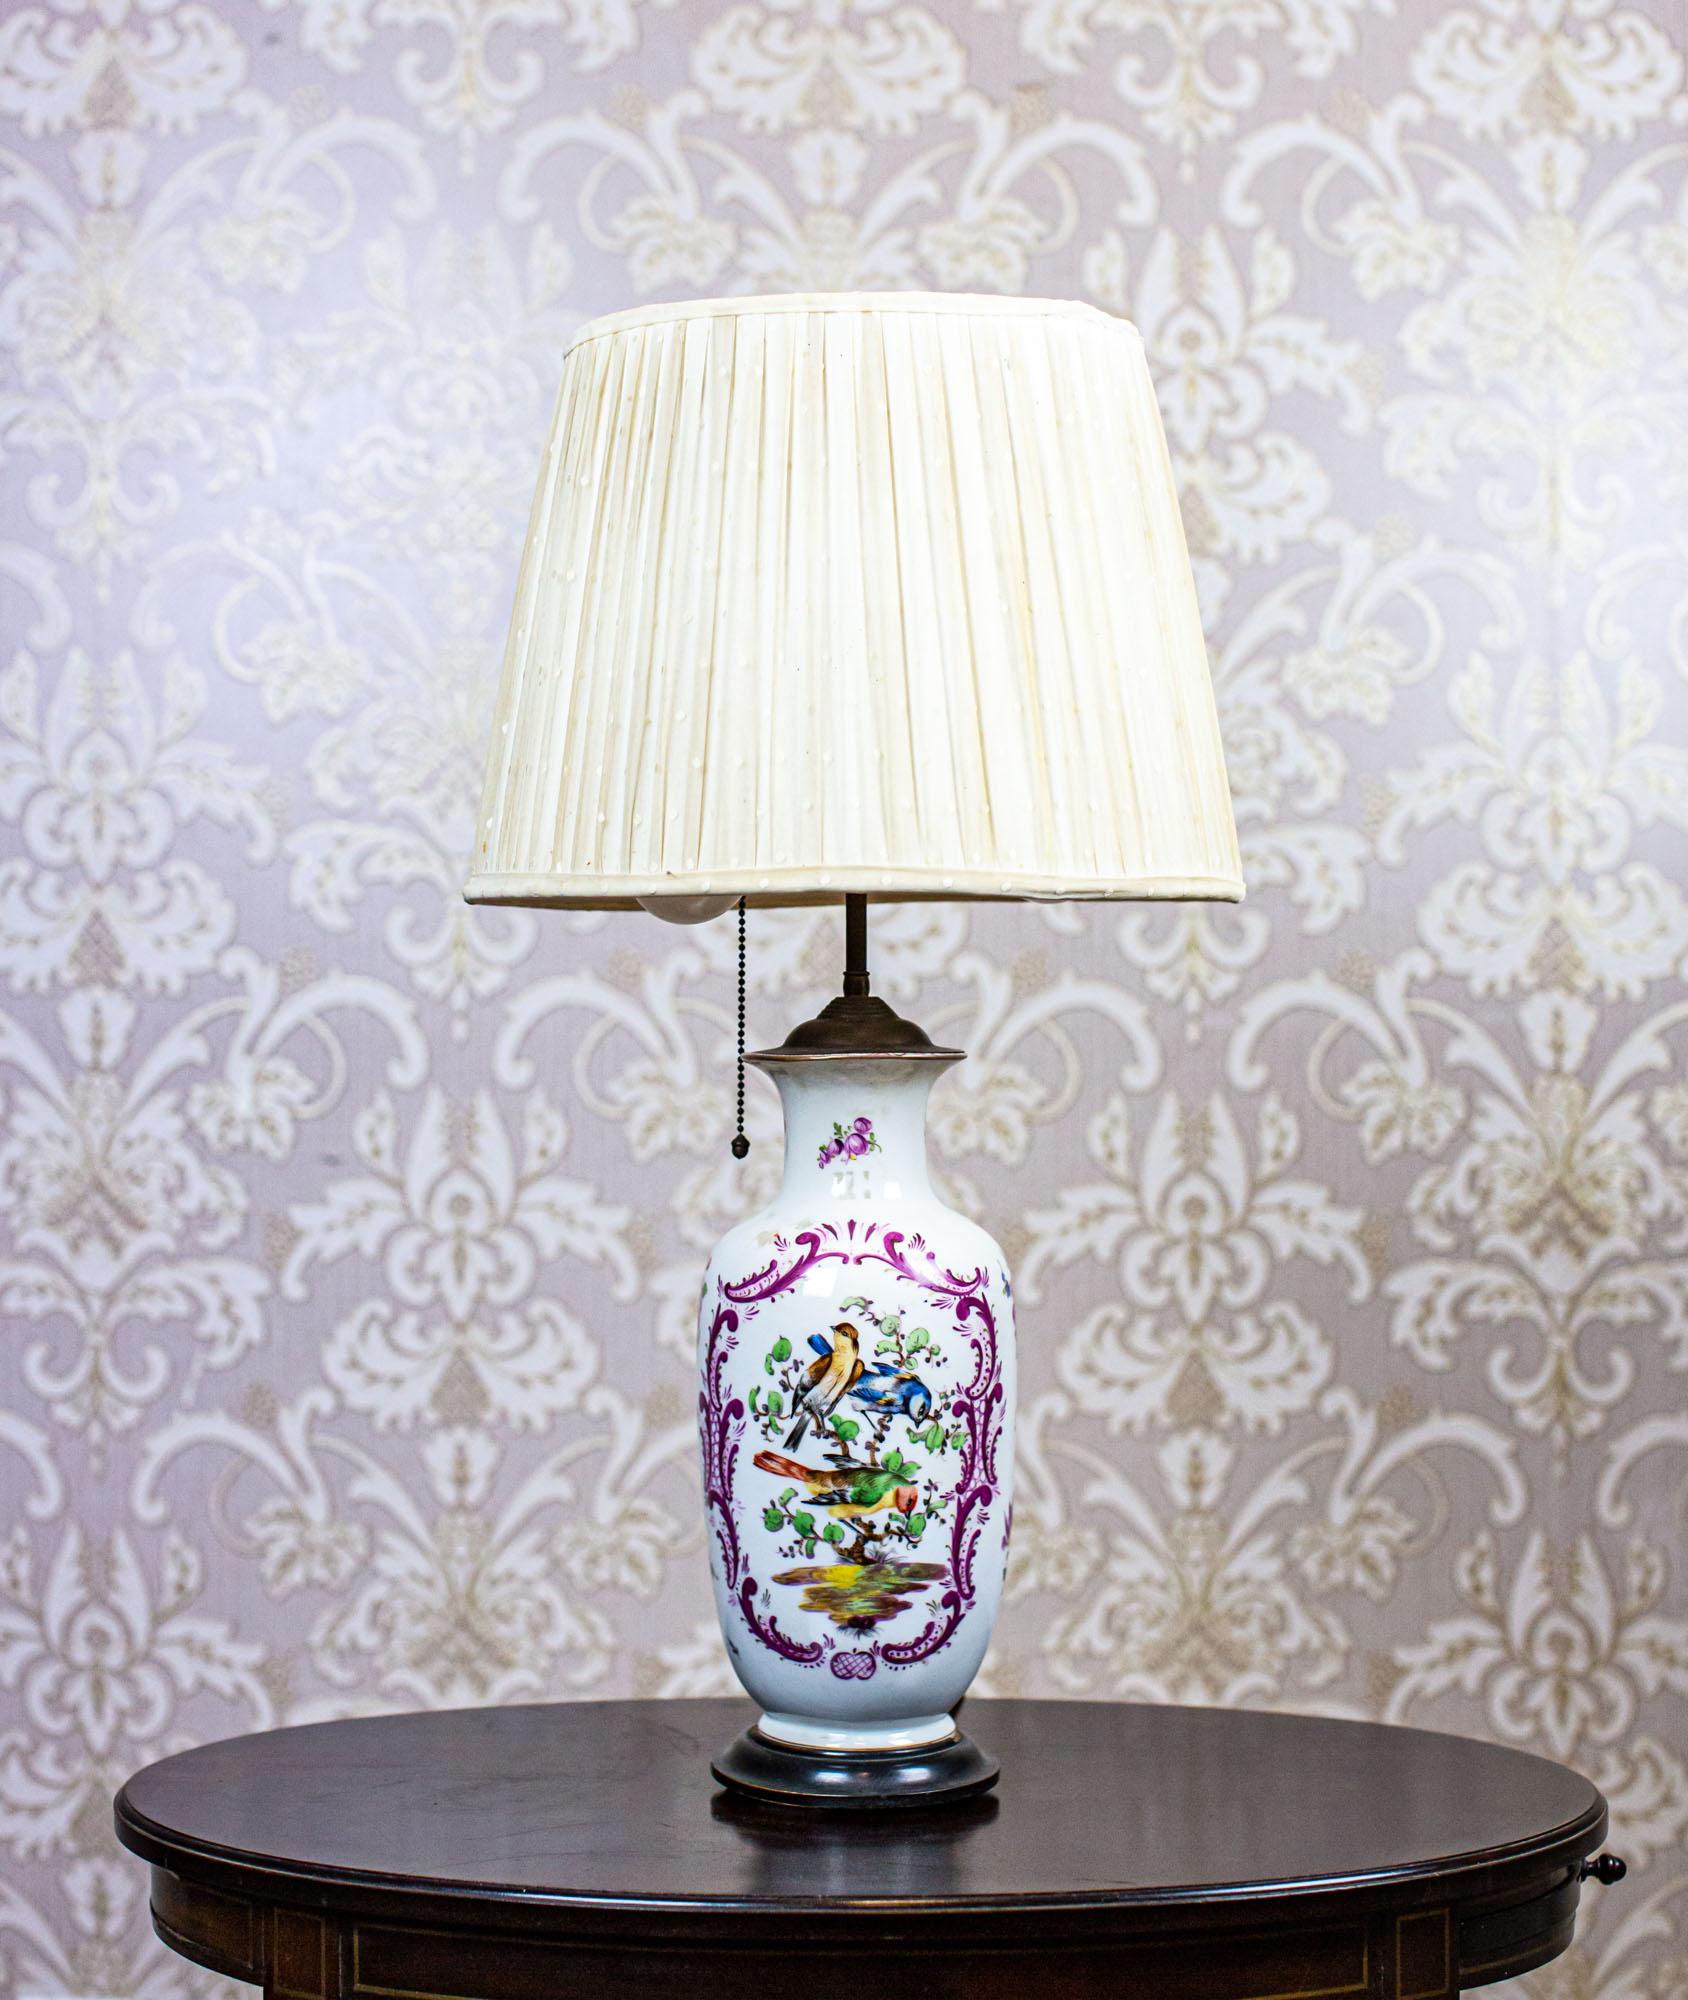 20th-Century Electric Table Lamp with Decorative Ceramic Base

We present you an electric table lamp from the mid. 20th century.
The ceramic base is decorated with patterns depicting nature. The shade is made of a fabric.
The source consists of two